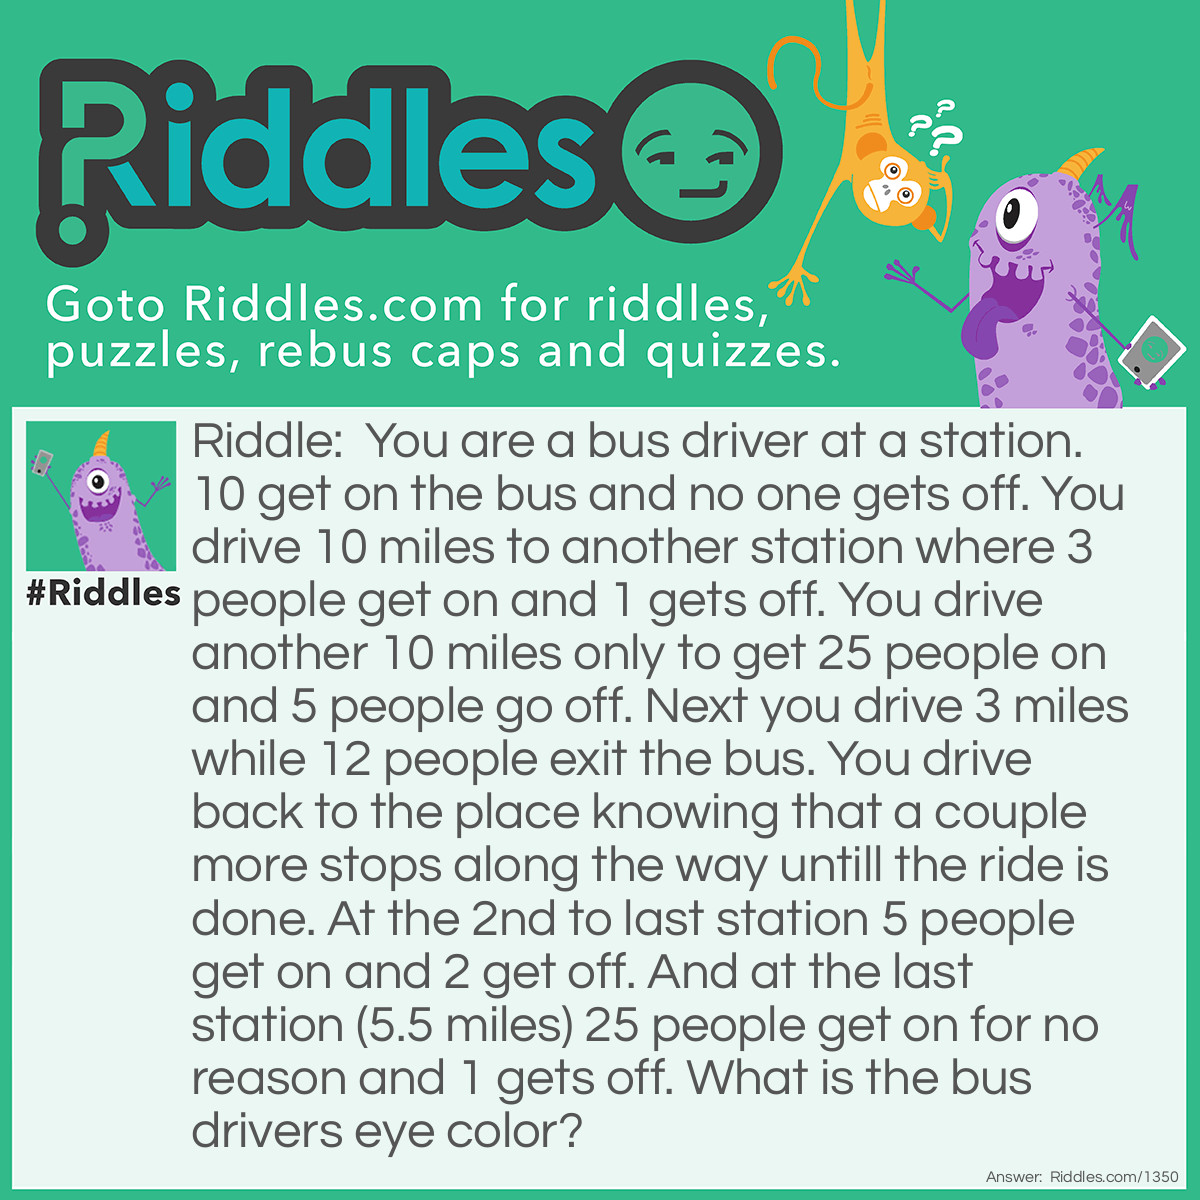 Riddle: You are a bus driver at a station. 10 get on the bus and no one gets off. You drive 10 miles to another station where 3 people get on and 1 gets off. You drive another 10 miles only to get 25 people on and 5 people go off. Next you drive 3 miles while 12 people exit the bus. You drive back to the place knowing that a couple more stops along the way untill the ride is done. At the 2nd to last station 5 people get on and 2 get off. And at the last station (5.5 miles) 25 people get on for no reason and 1 gets off. What is the bus drivers eye color? Answer: Brown/blue/green (i don't know how i would put it though so if you guessed your eye color you got it right :) )